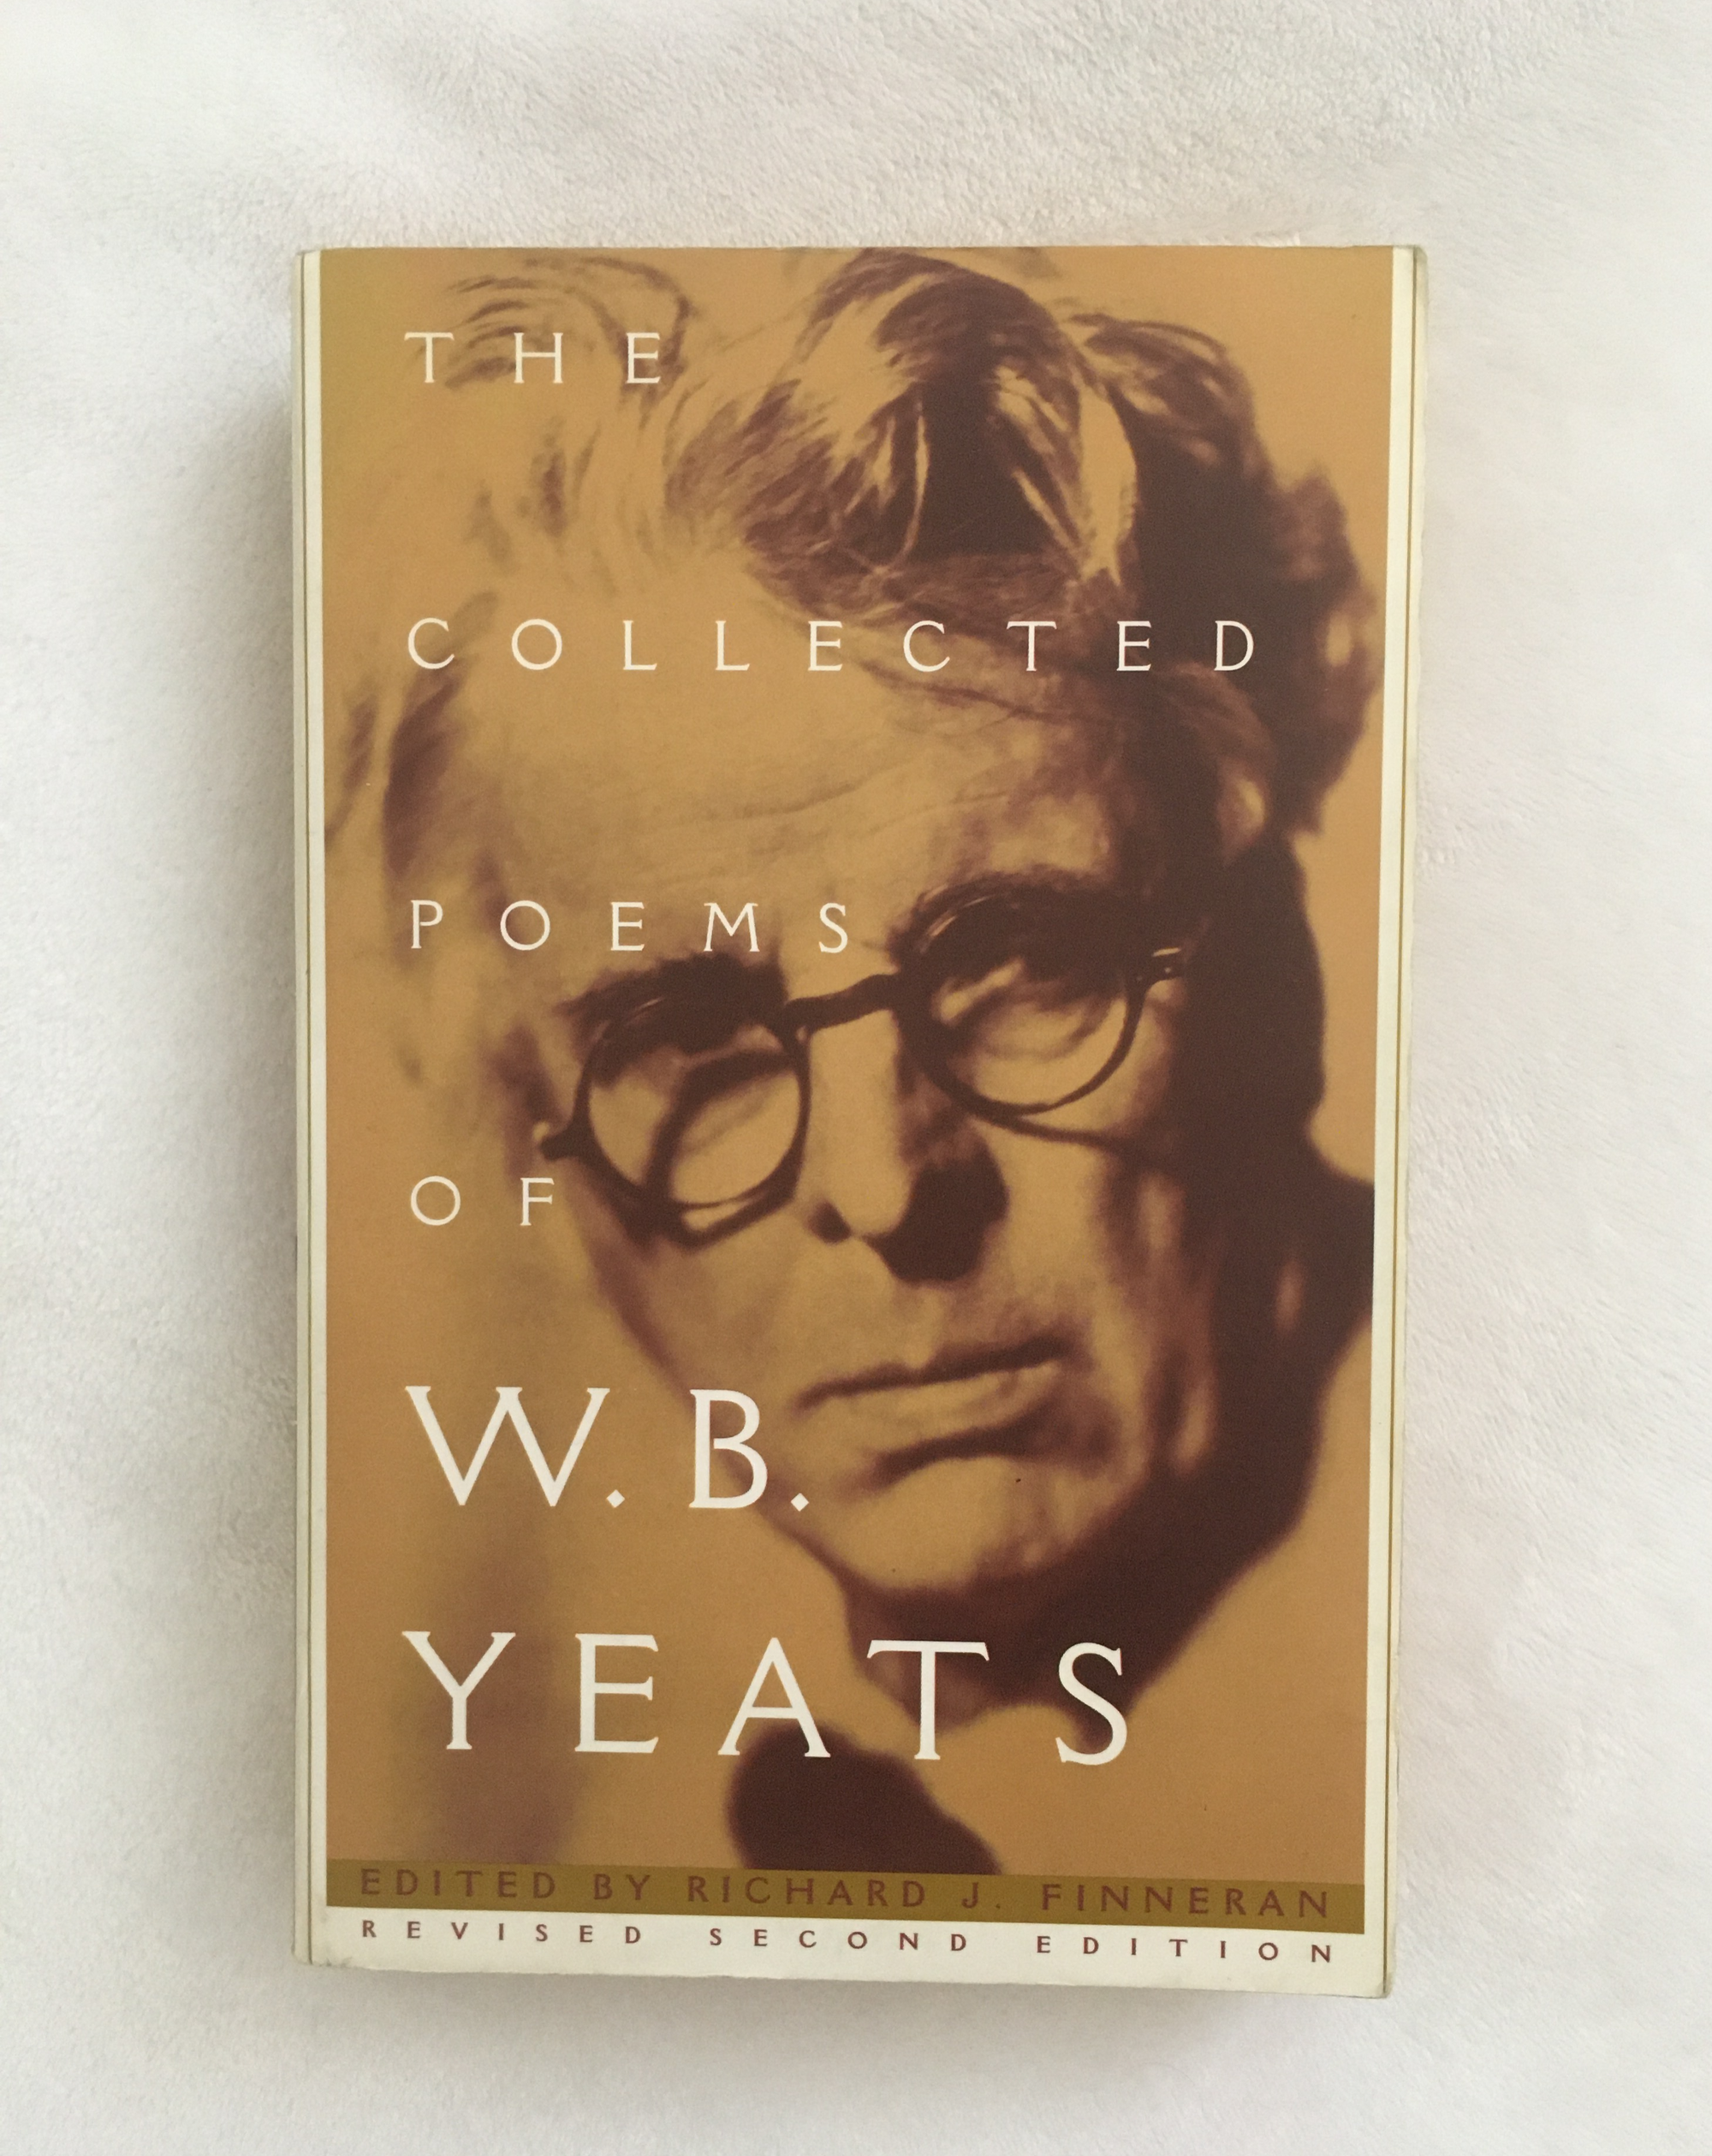 The Collected Poems of W.B. Yeats by W.B. Yeats, book, Ten Dollar Books, Ten Dollar Books